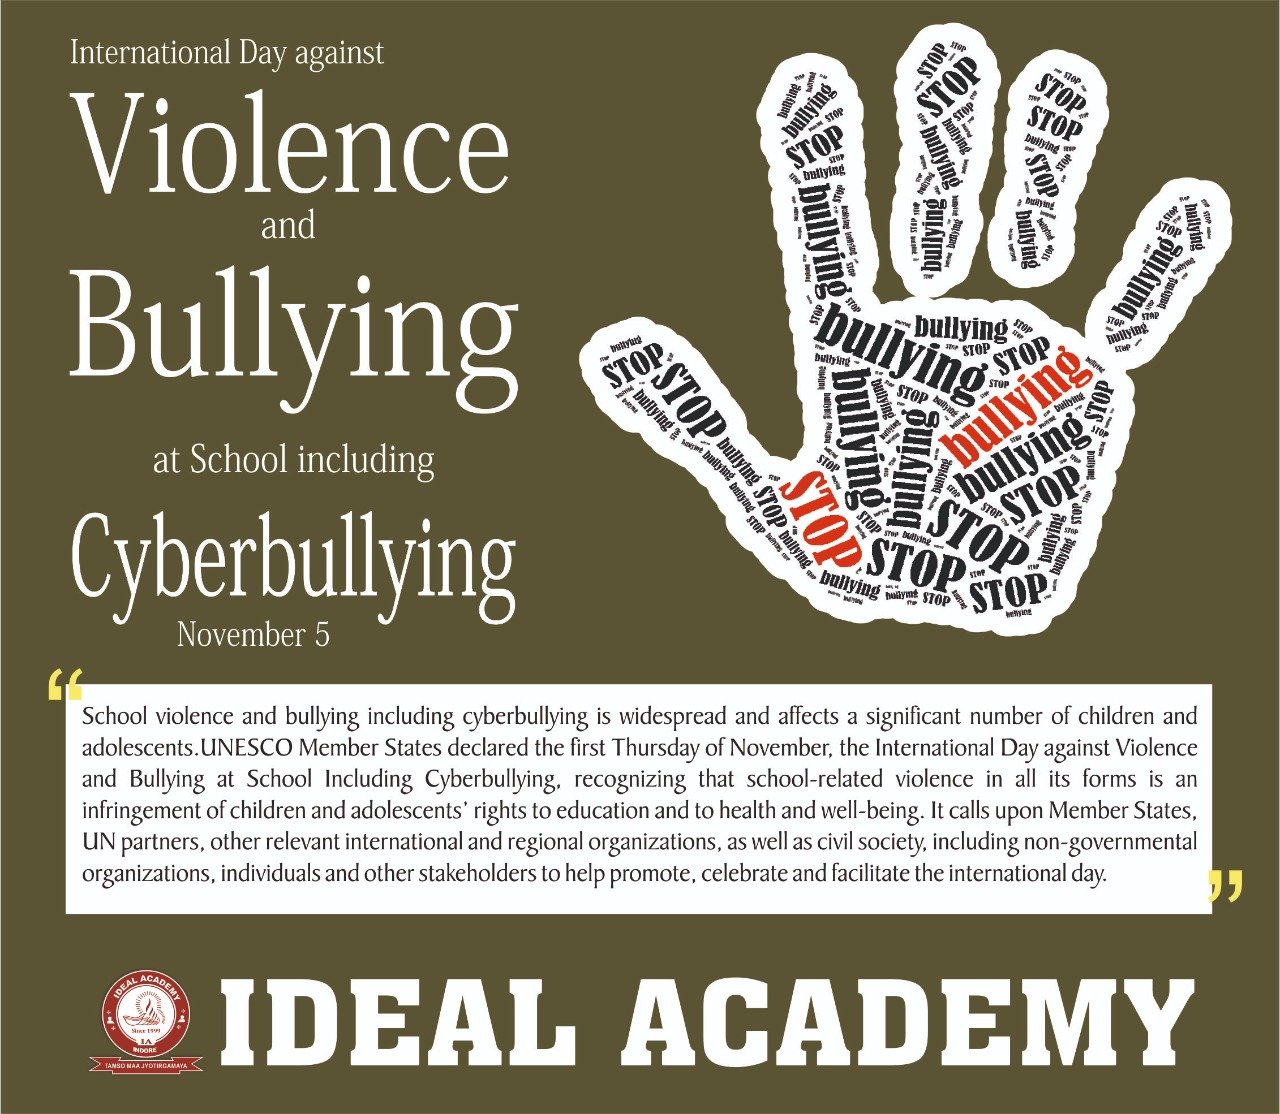 International Day Against Violence and Bullying at School including Cyberbullying